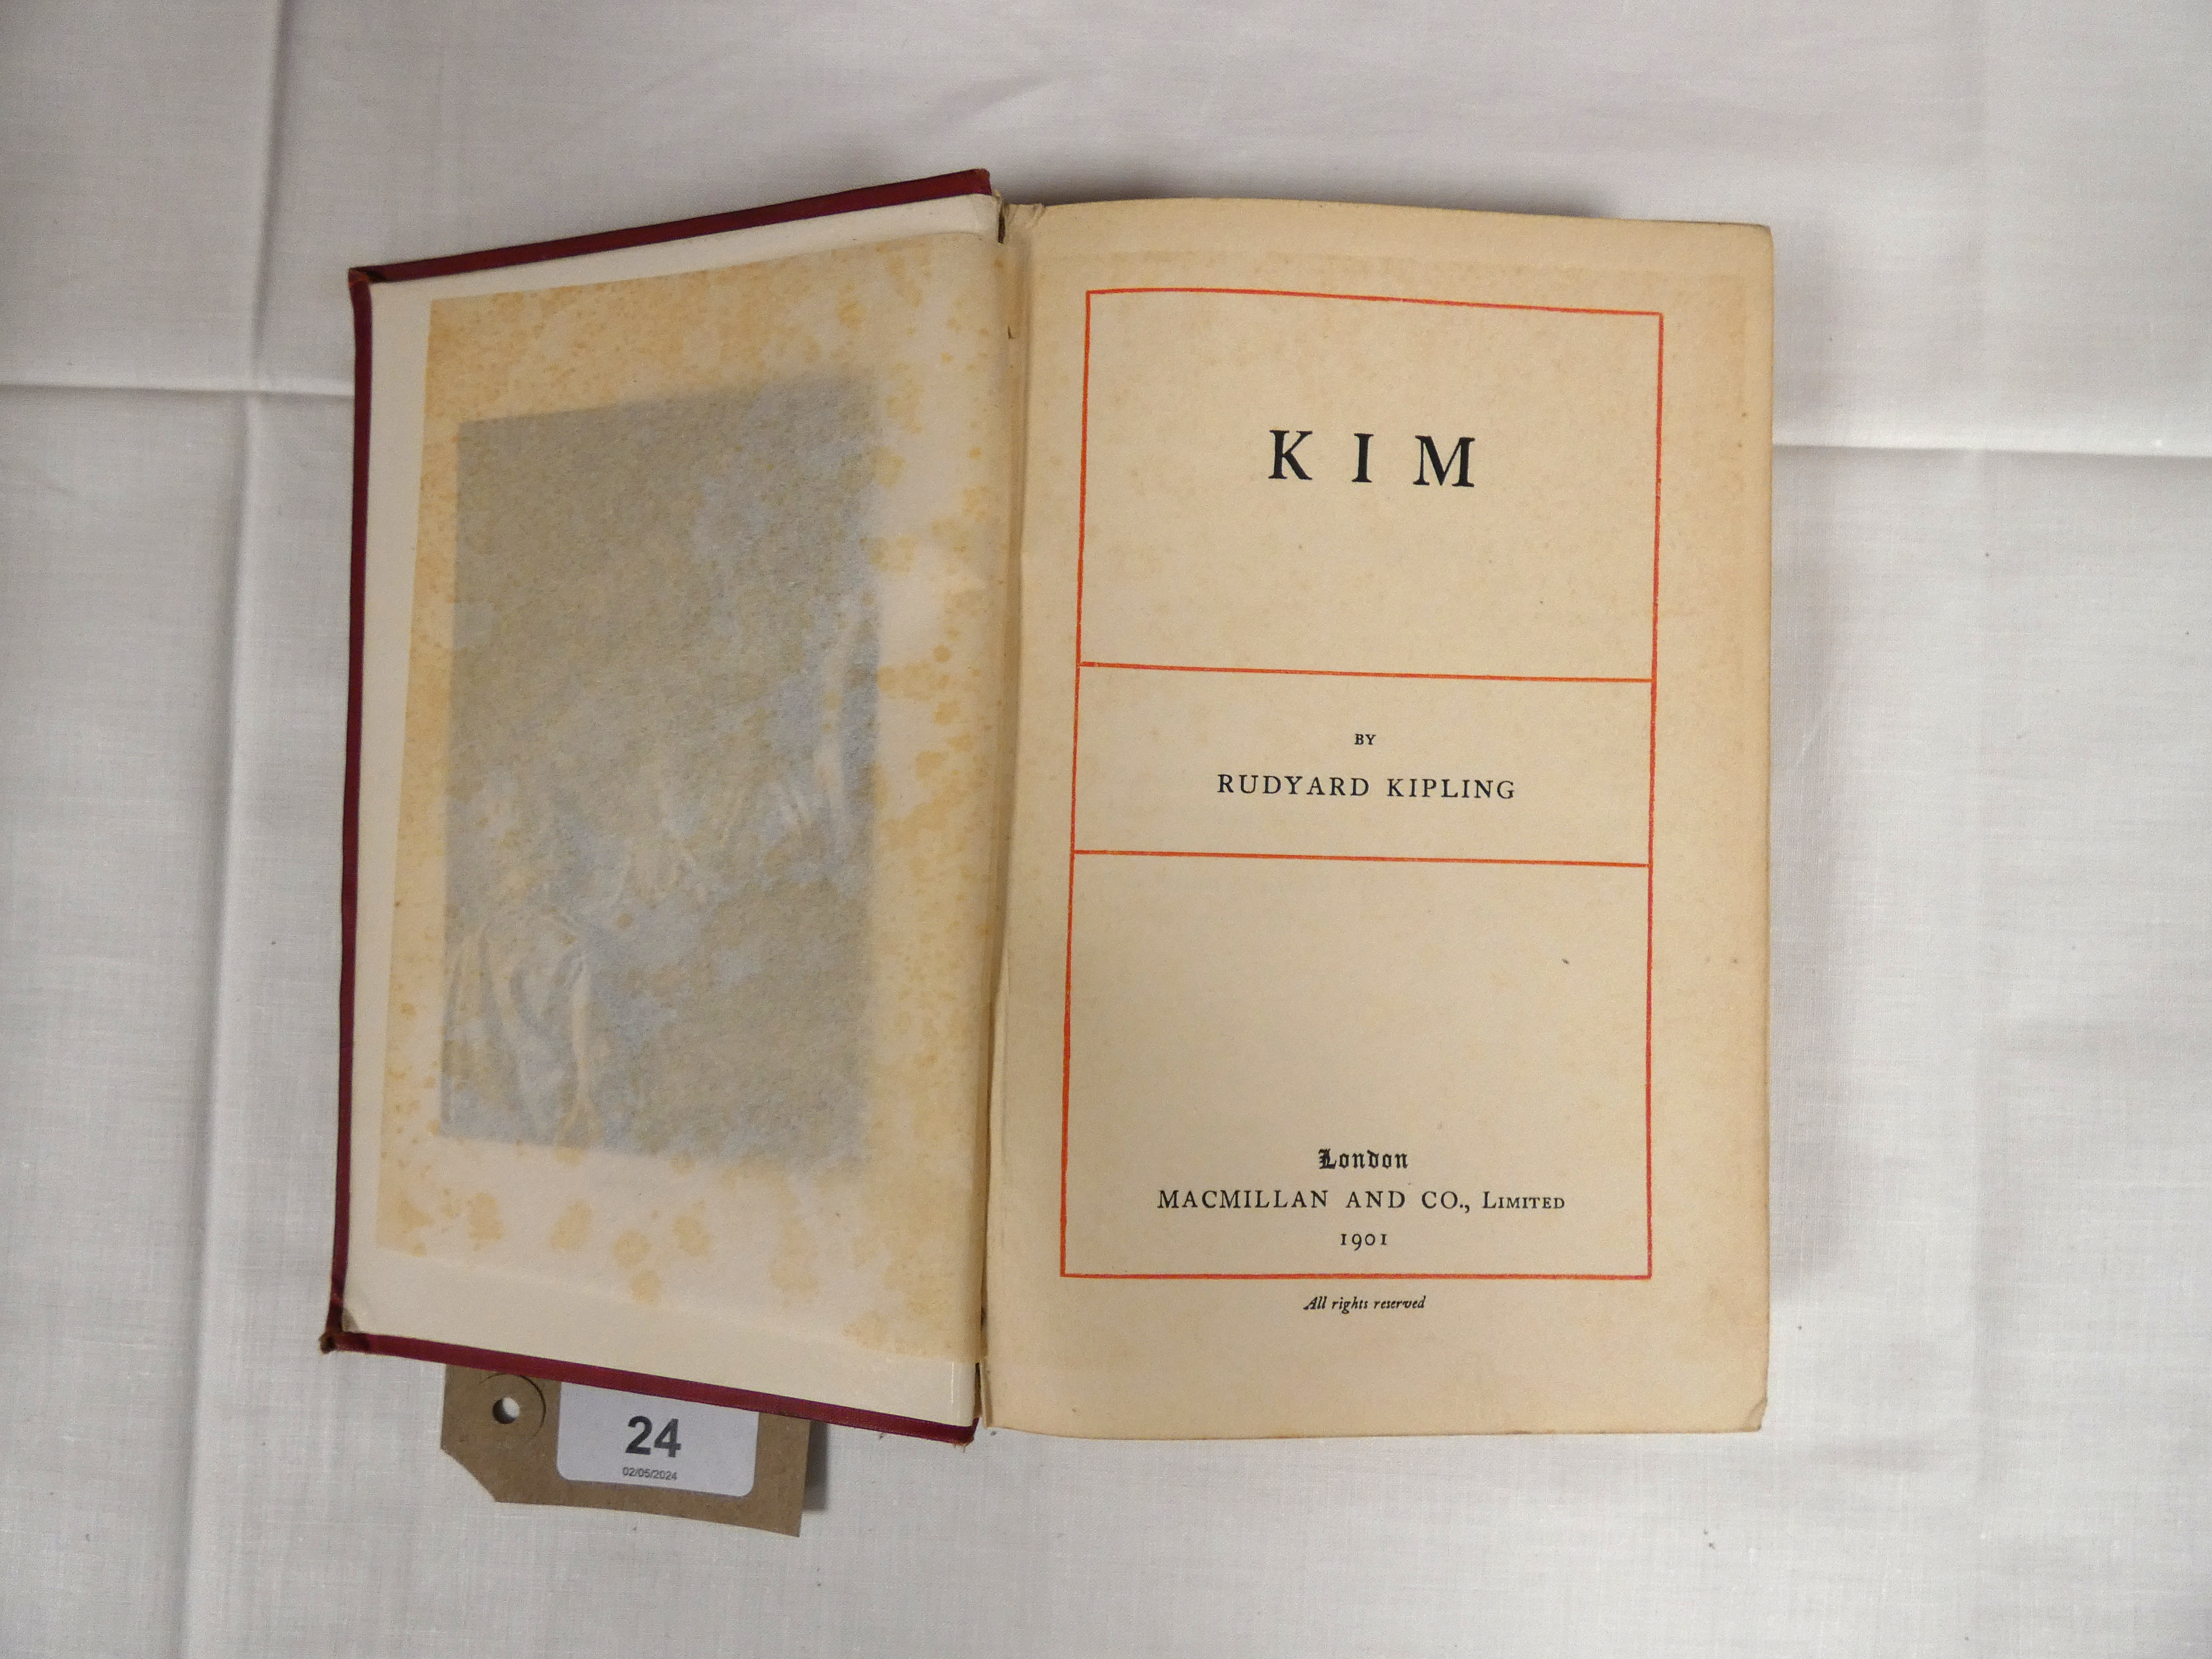 KIPLING RUDYARD.  18 various vols., mainly 1sts incl. 1st eds. of Kim (x 2), Stalky & Co. (x 2), - Image 4 of 4